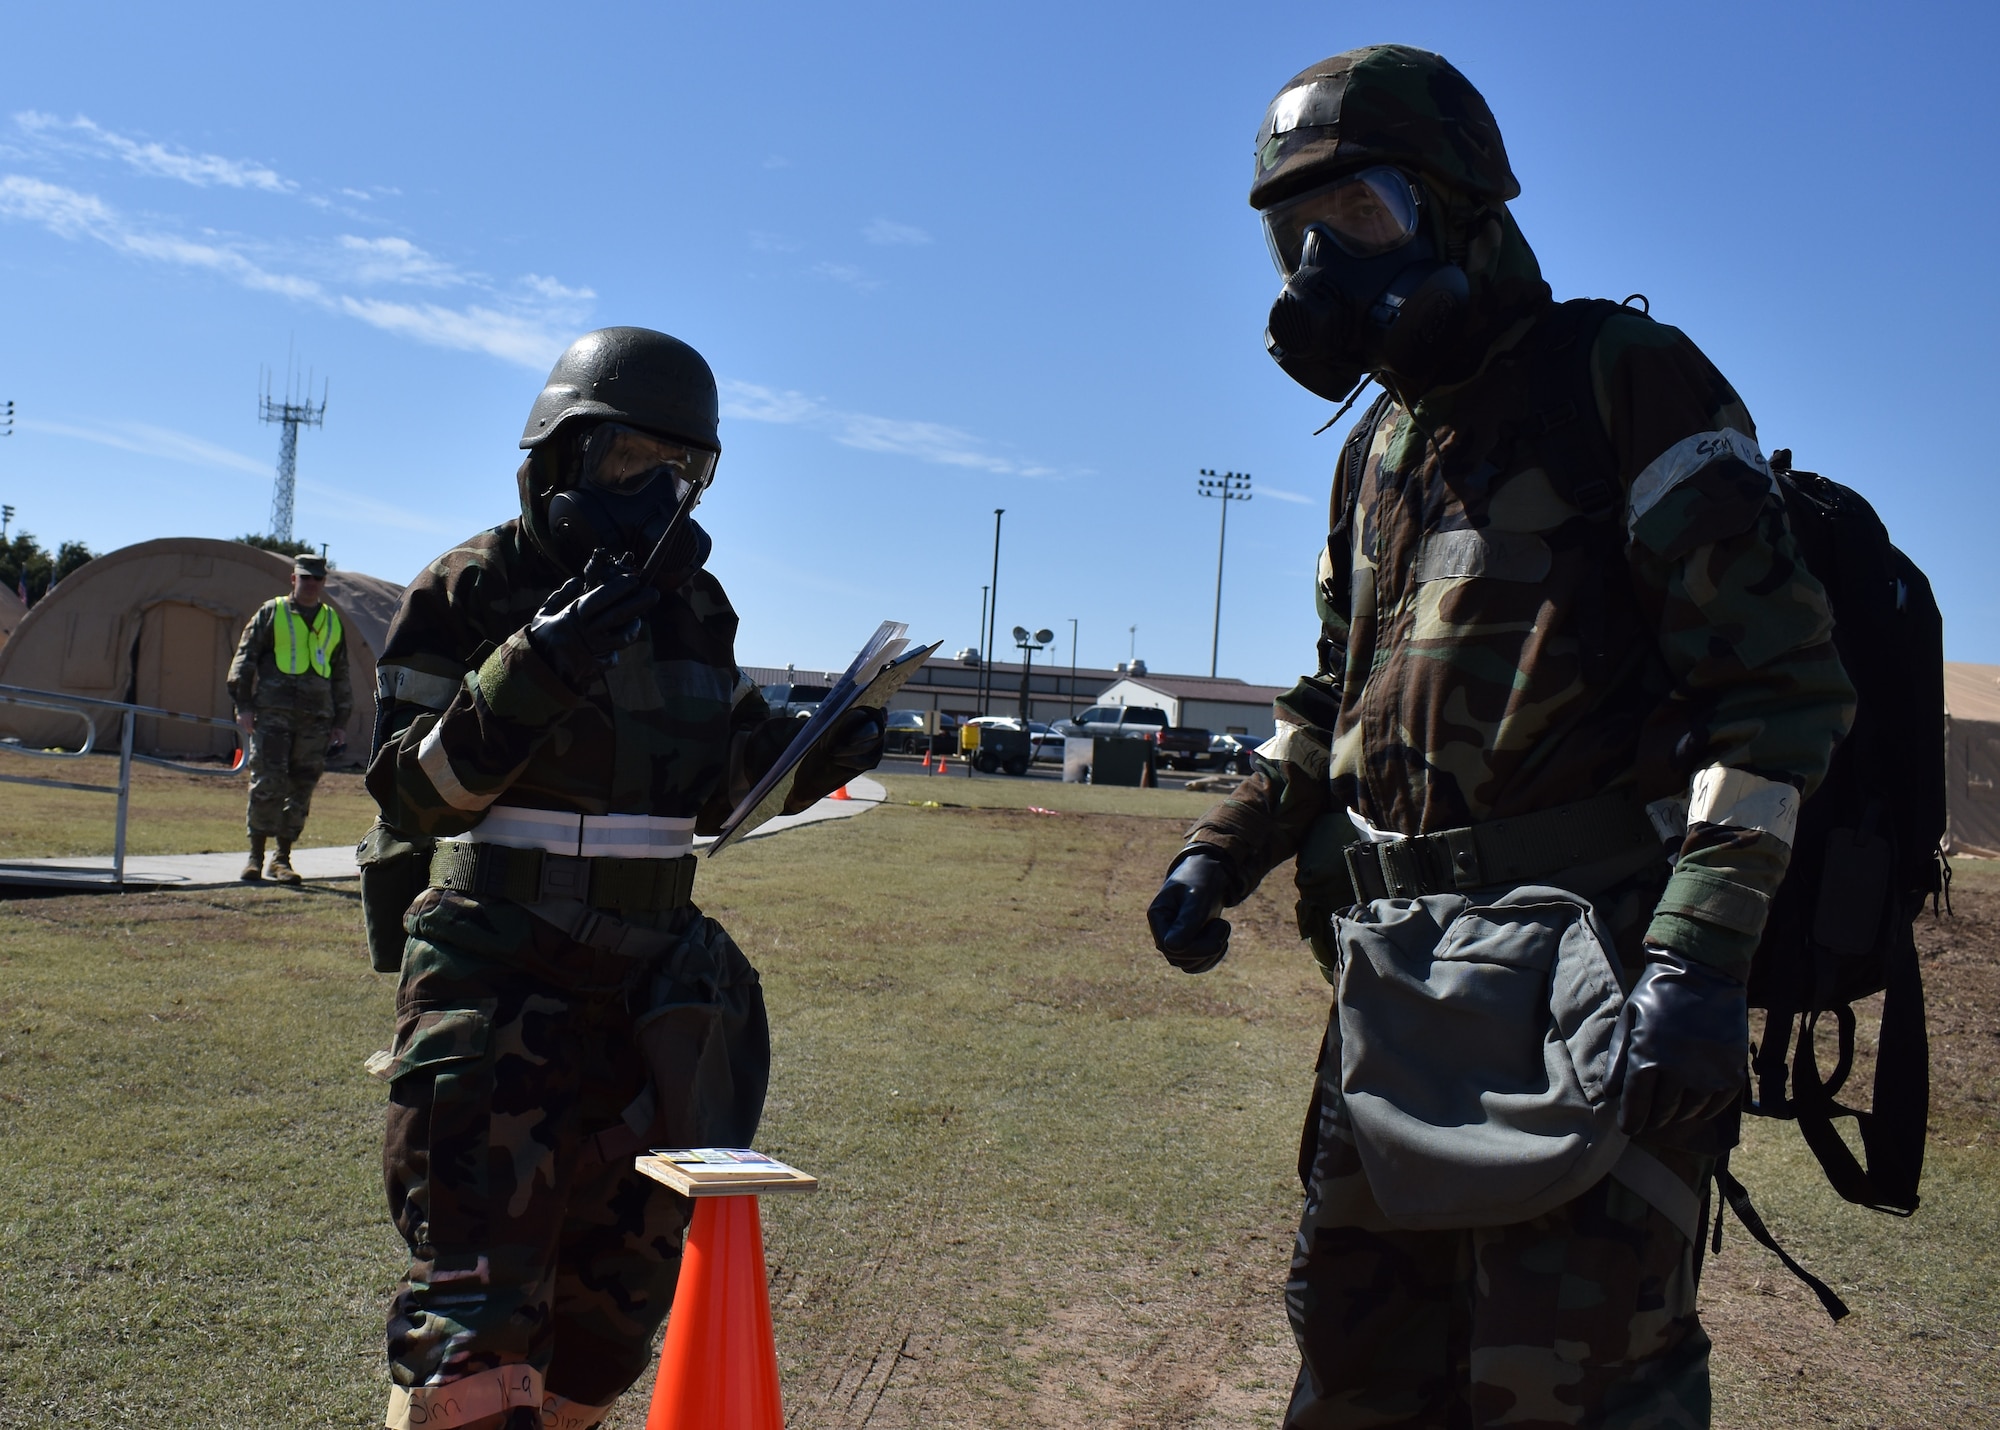 Two Airmen assigned to the 301st Fighter Wing conduct a post attack reconnaissance sweep as a member from the wing inspection team observes them during the Airmen Readiness Training Exercise (ARTEX), November 3, 2019, at U.S. Naval Air Station Joint Reserve Base Fort Worth, Texas. This annual exercise tests the wing's combat readiness through various scenarios which include the ability to survive and operate in a simulated chemically attacked environment. The wing is then evaluated to recognize areas of strength and identify areas needing improvement to ensure mission readiness when called. (U.S. Air Force photo by Staff Sgt. Randall Moose)